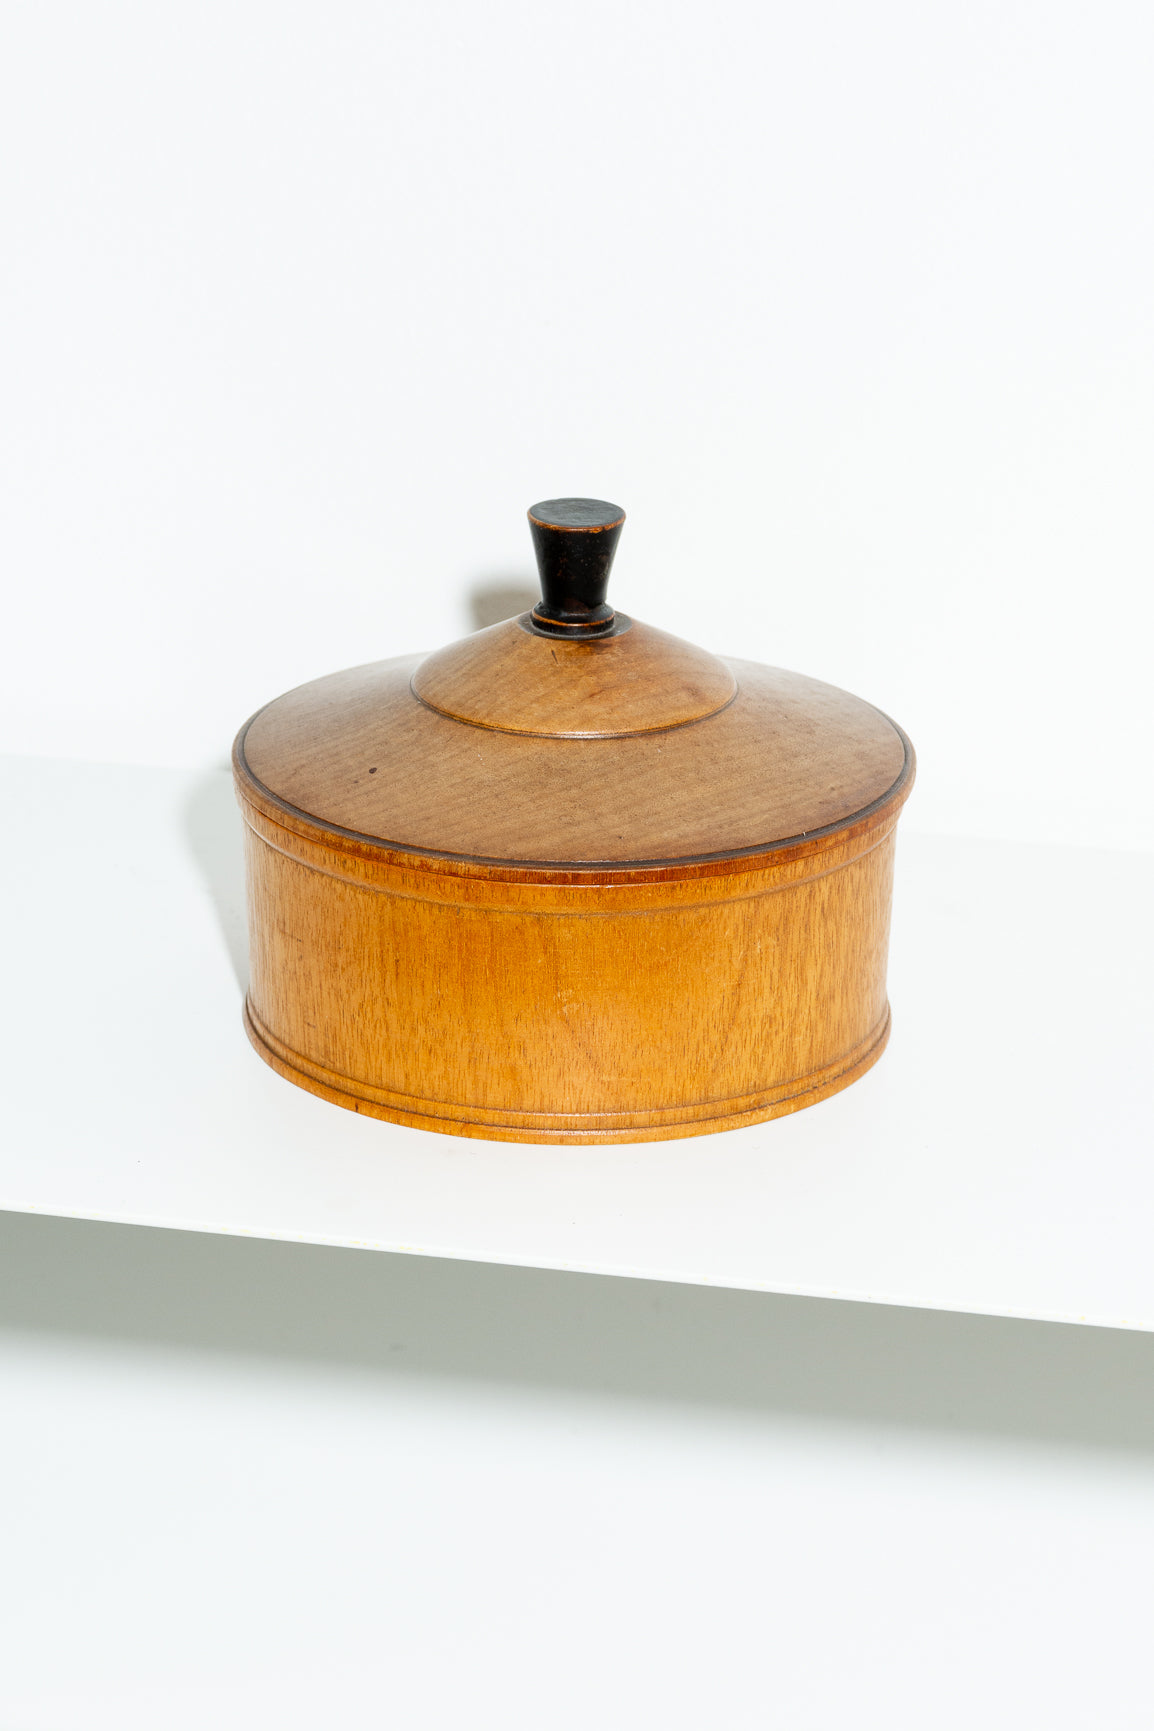 Hand turned vintage wooden pot with lid